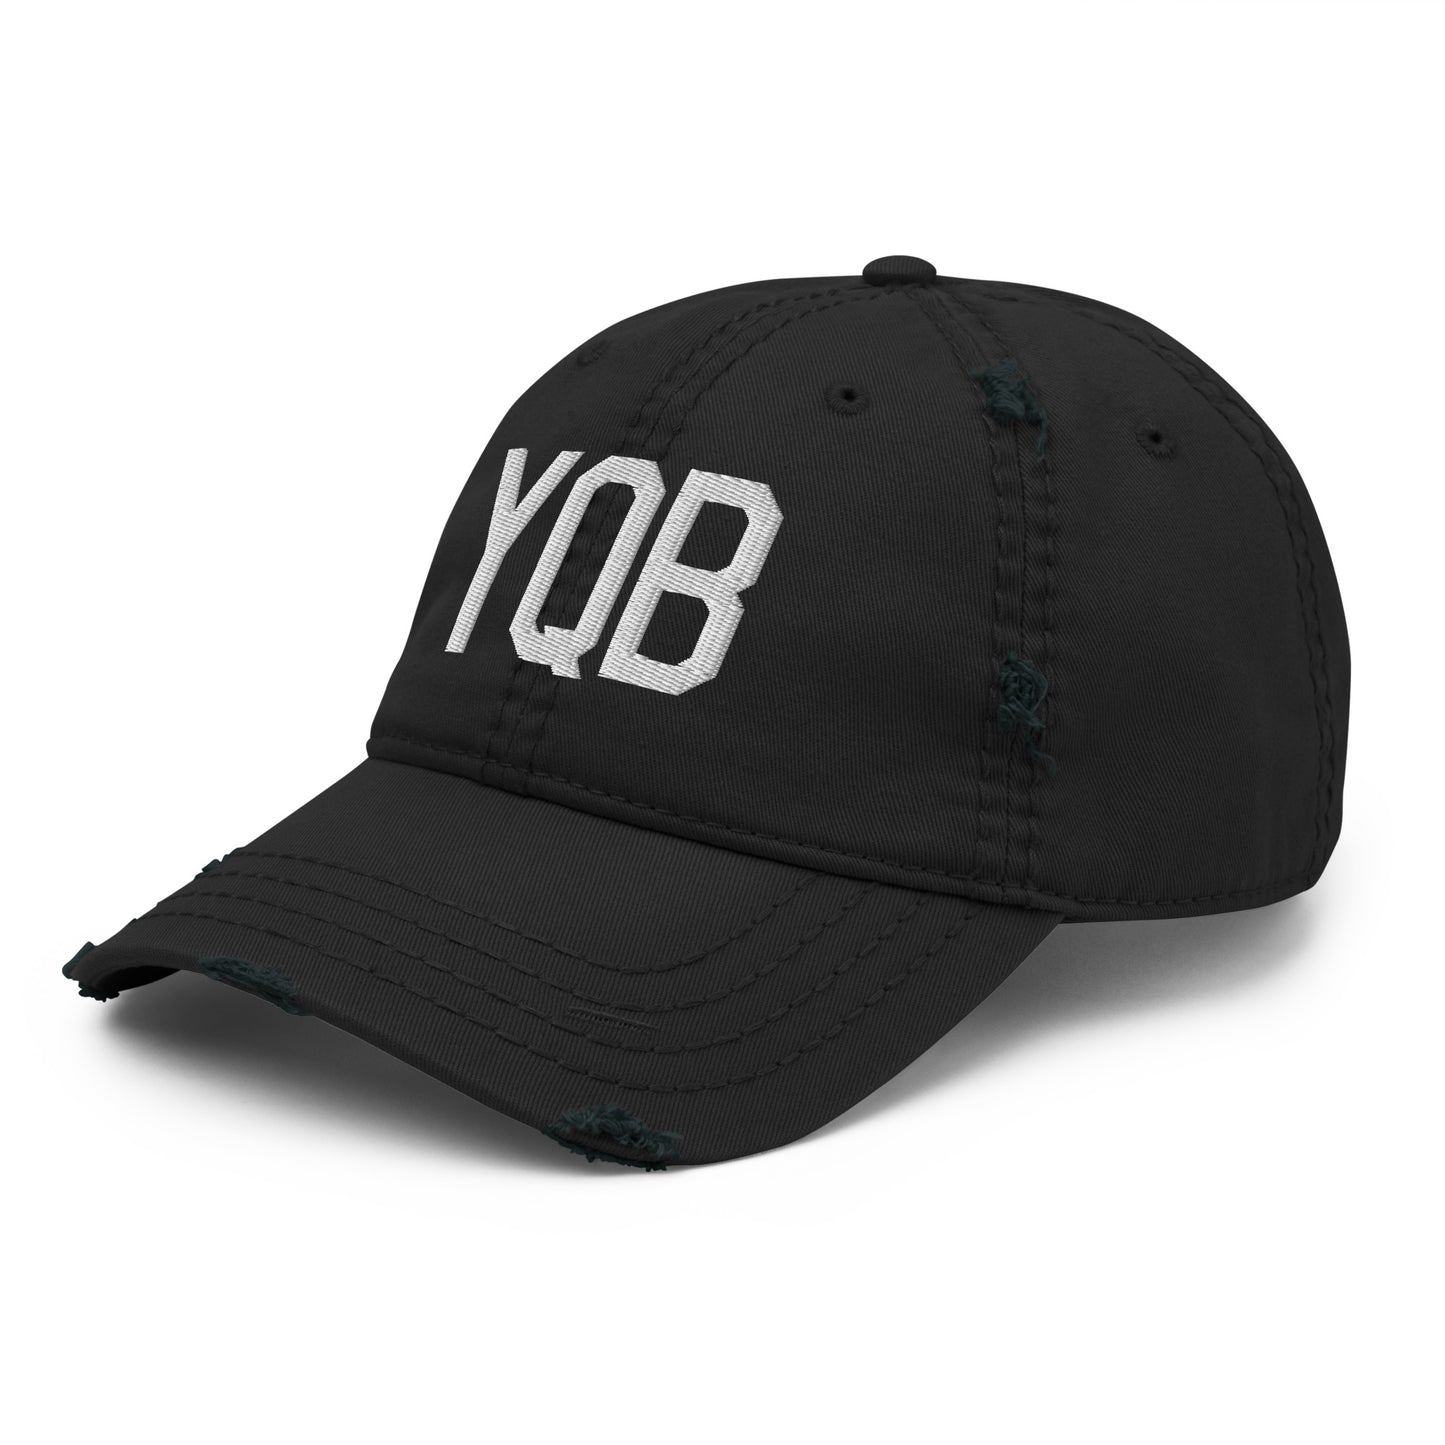 Airport Code Distressed Hat - White • YQB Quebec City • YHM Designs - Image 11